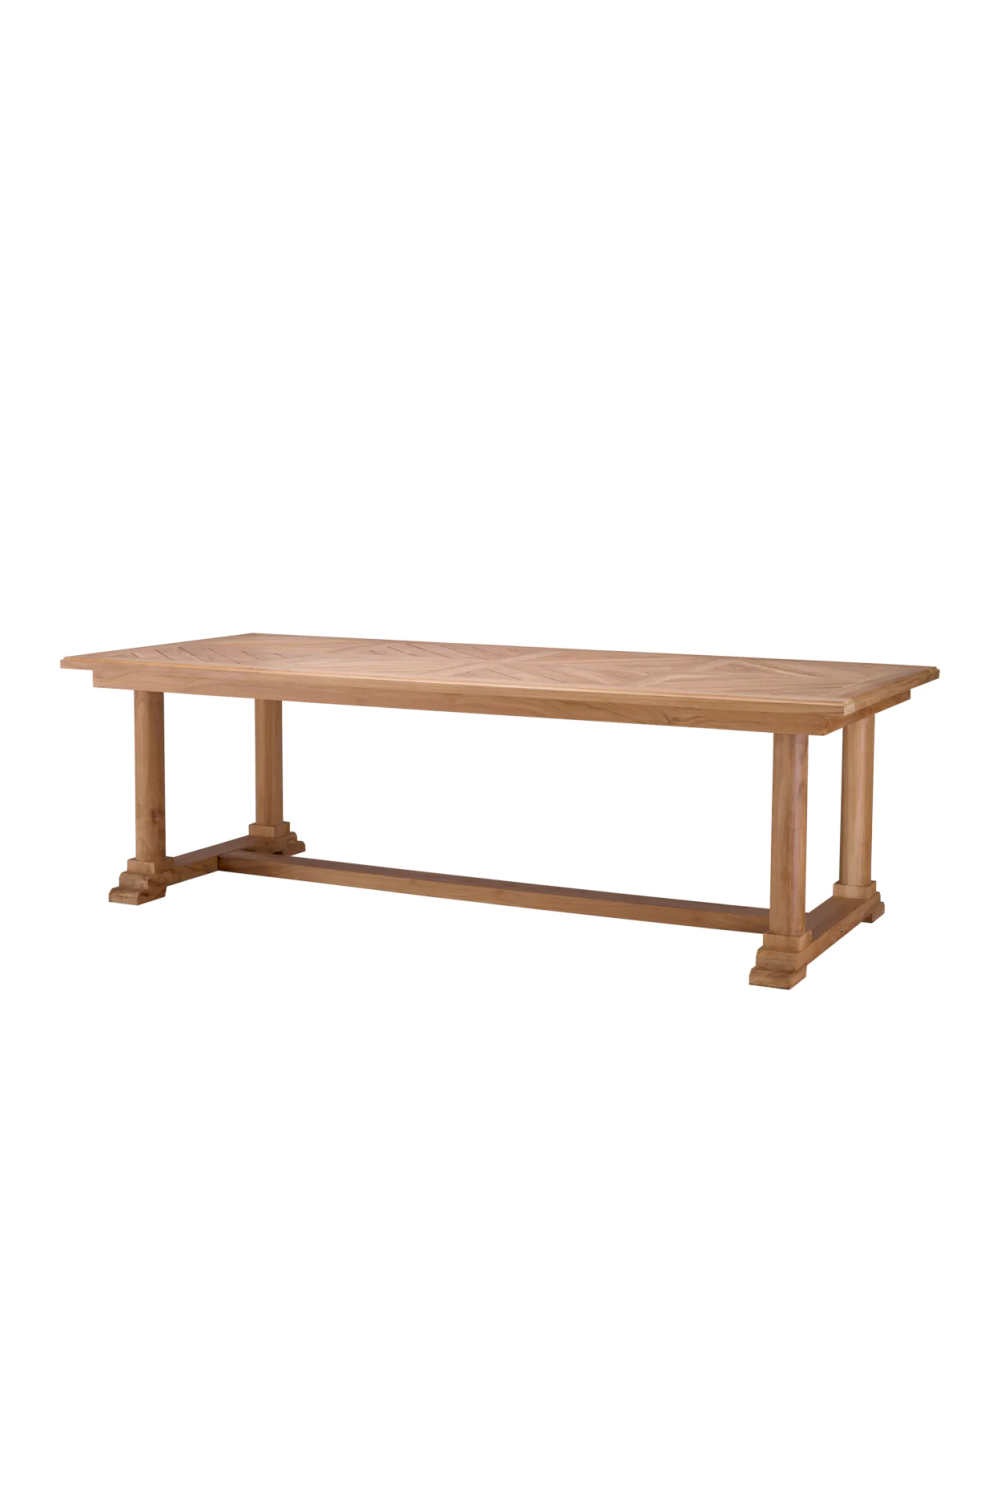 Wooden Outdoor Dining Table | Eichholtz Bell Rive | Oroa.com